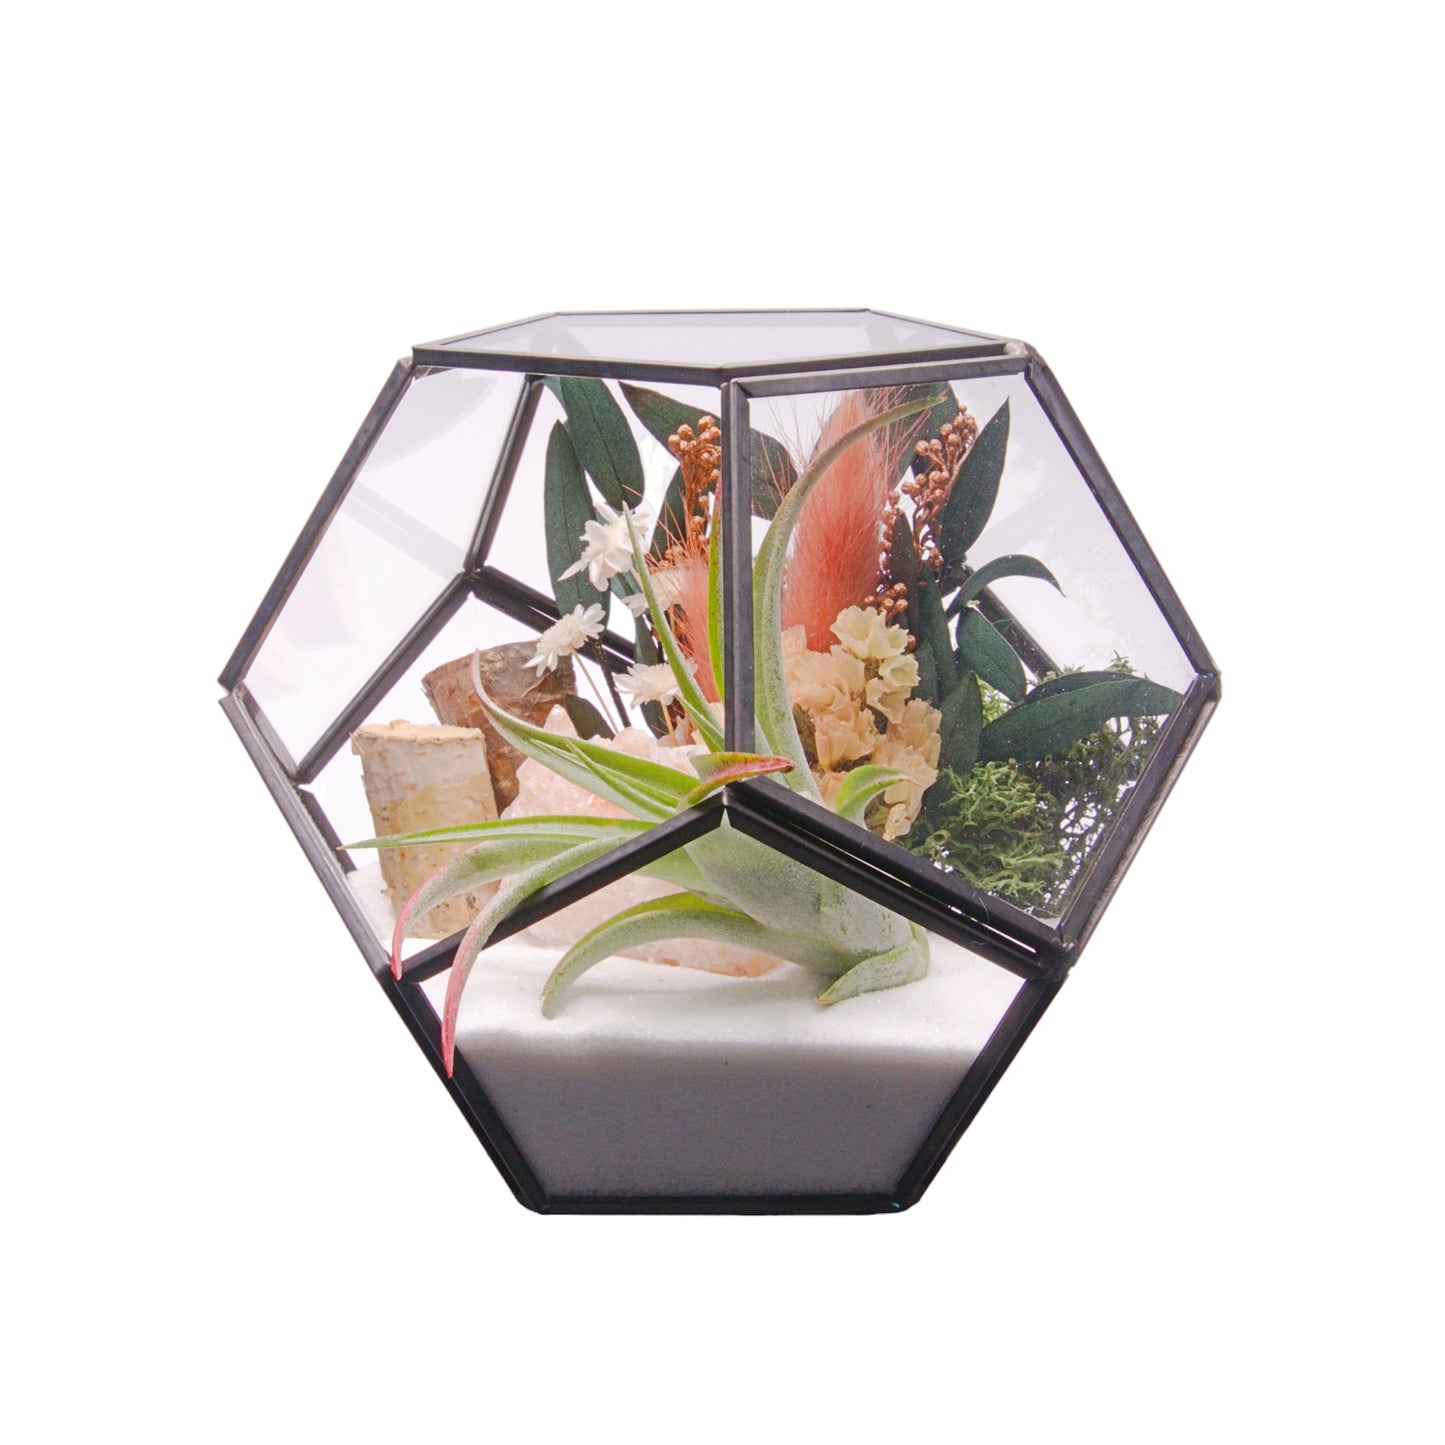 Black Victorian bowl terrarium with airplant, sand, dried flowers, moss, wood and tri-coloured calcite crystal